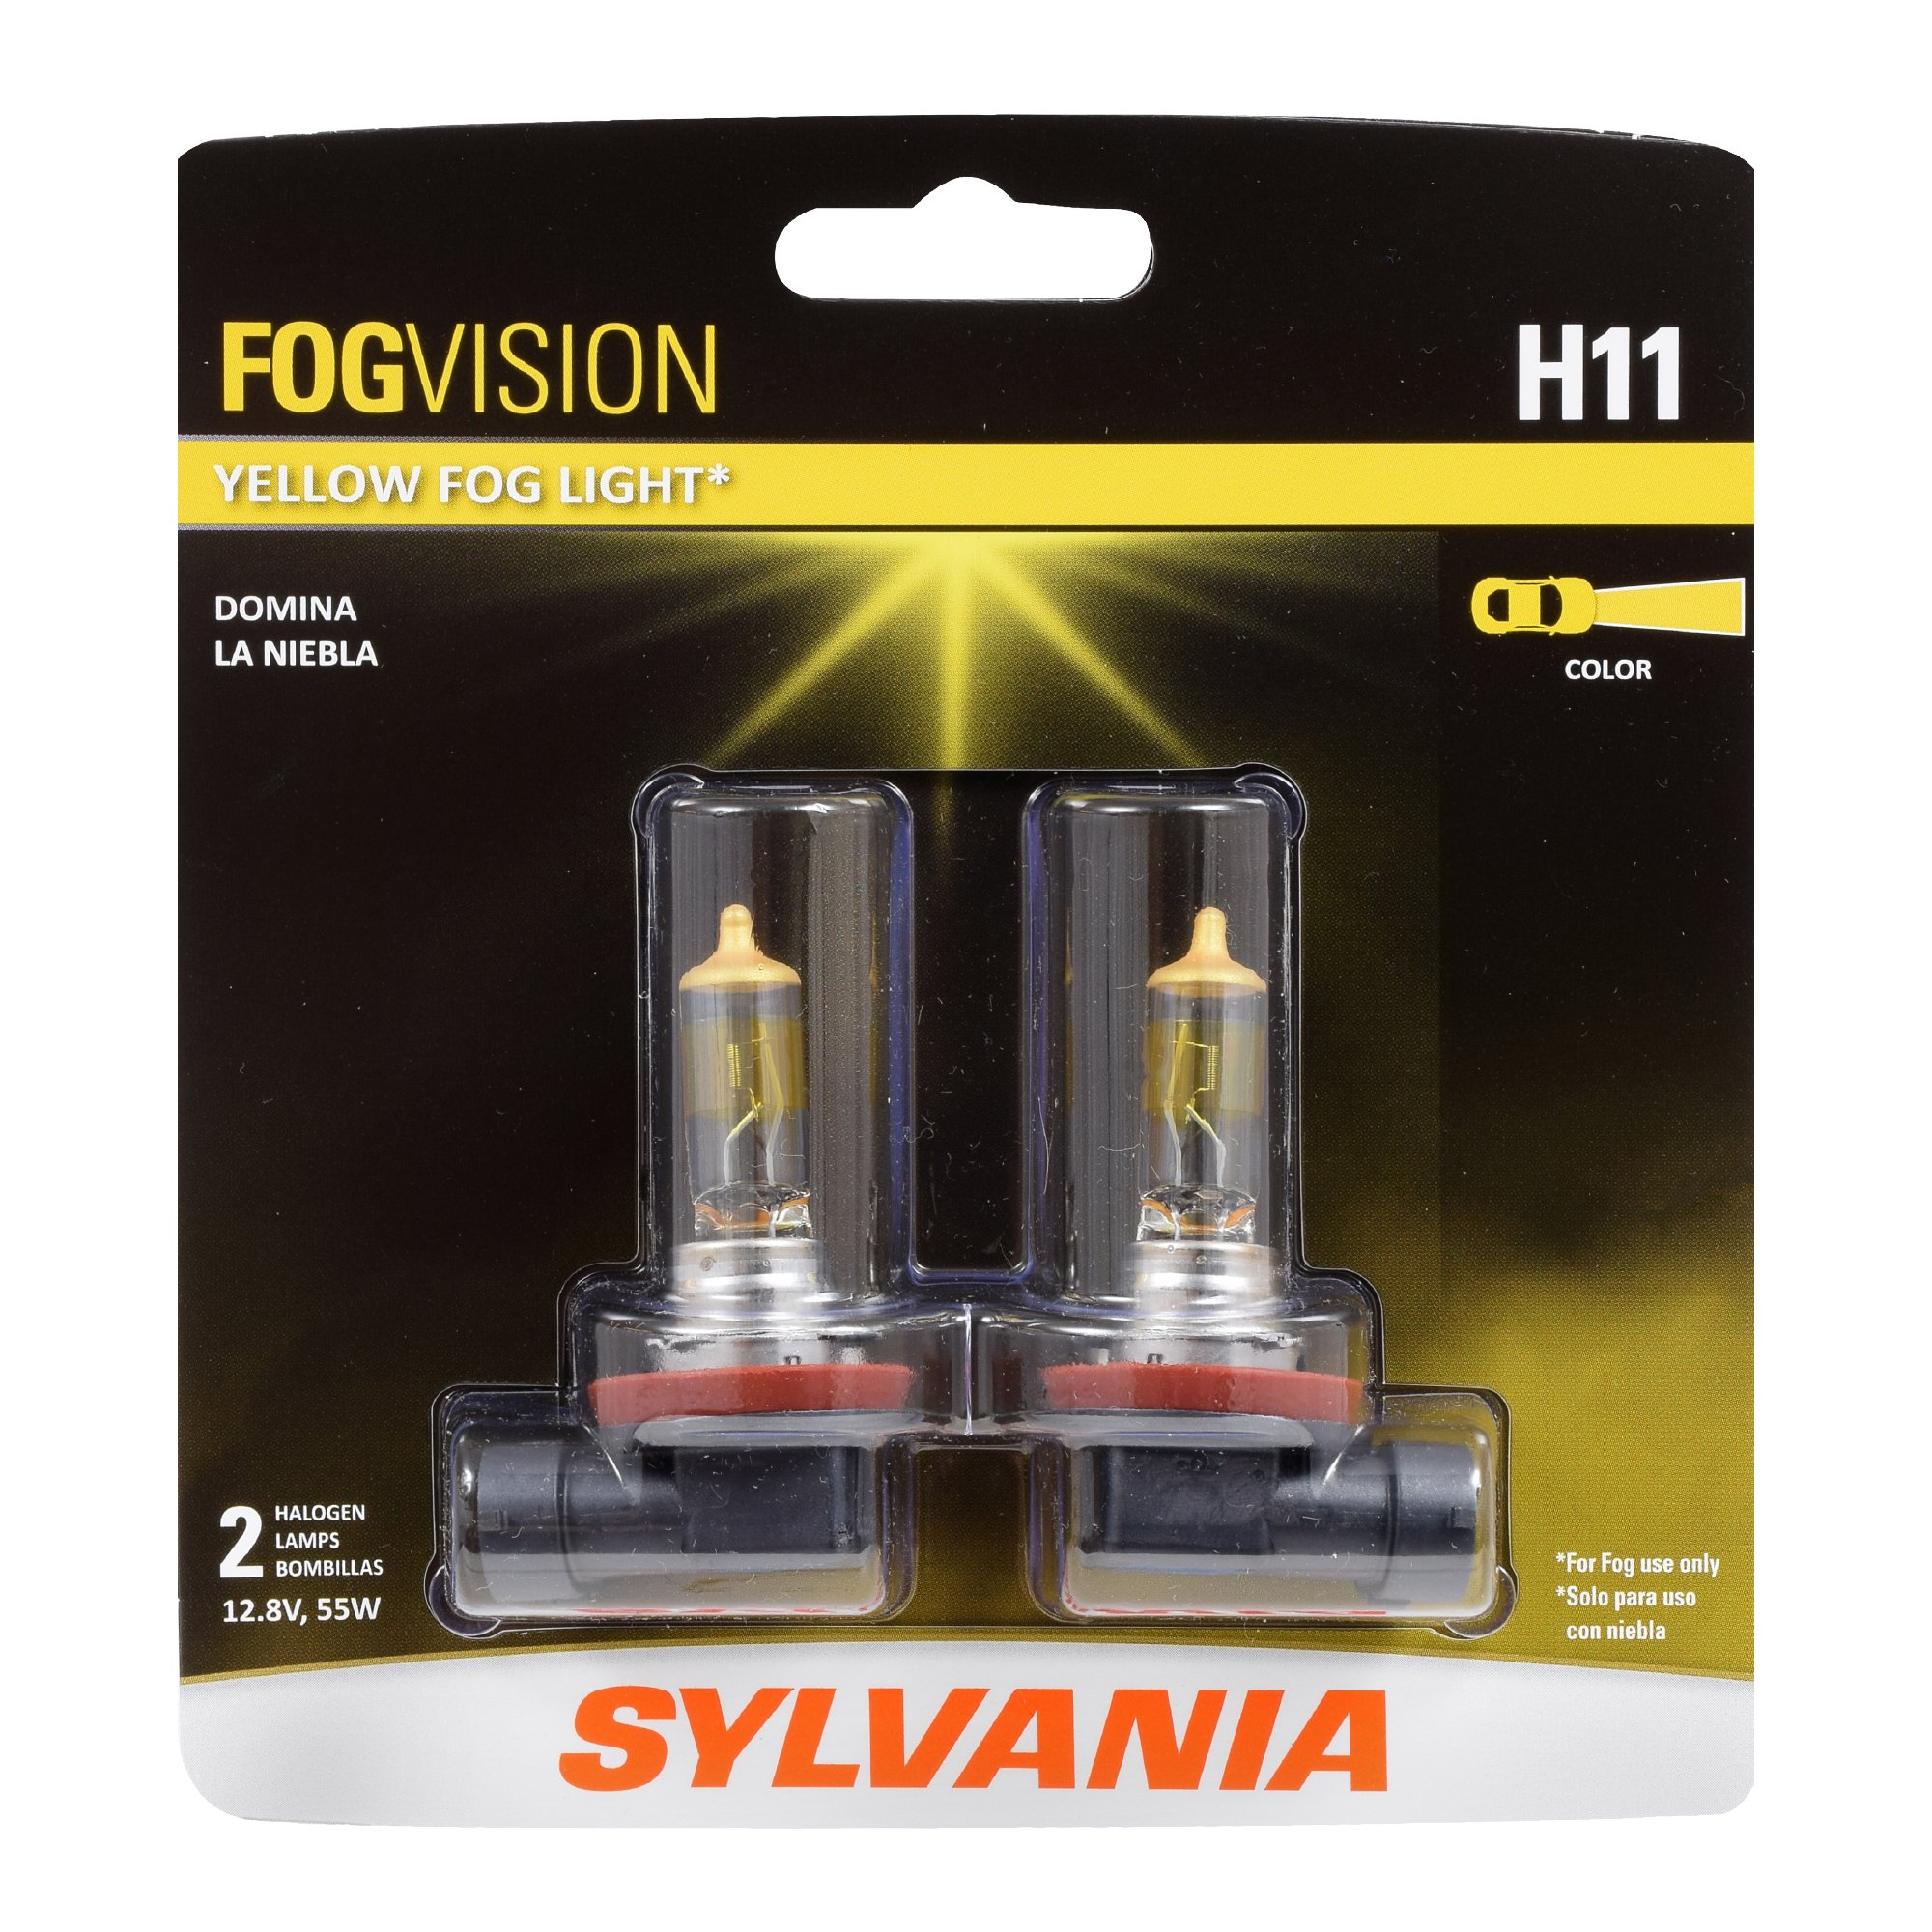 High Performance Yellow Halogen Fog Lights Sleek Style & Improved Safety SYLVANIA H11 Fog Vision For Fog Use Only Street Legal Contains 2 Bulbs 